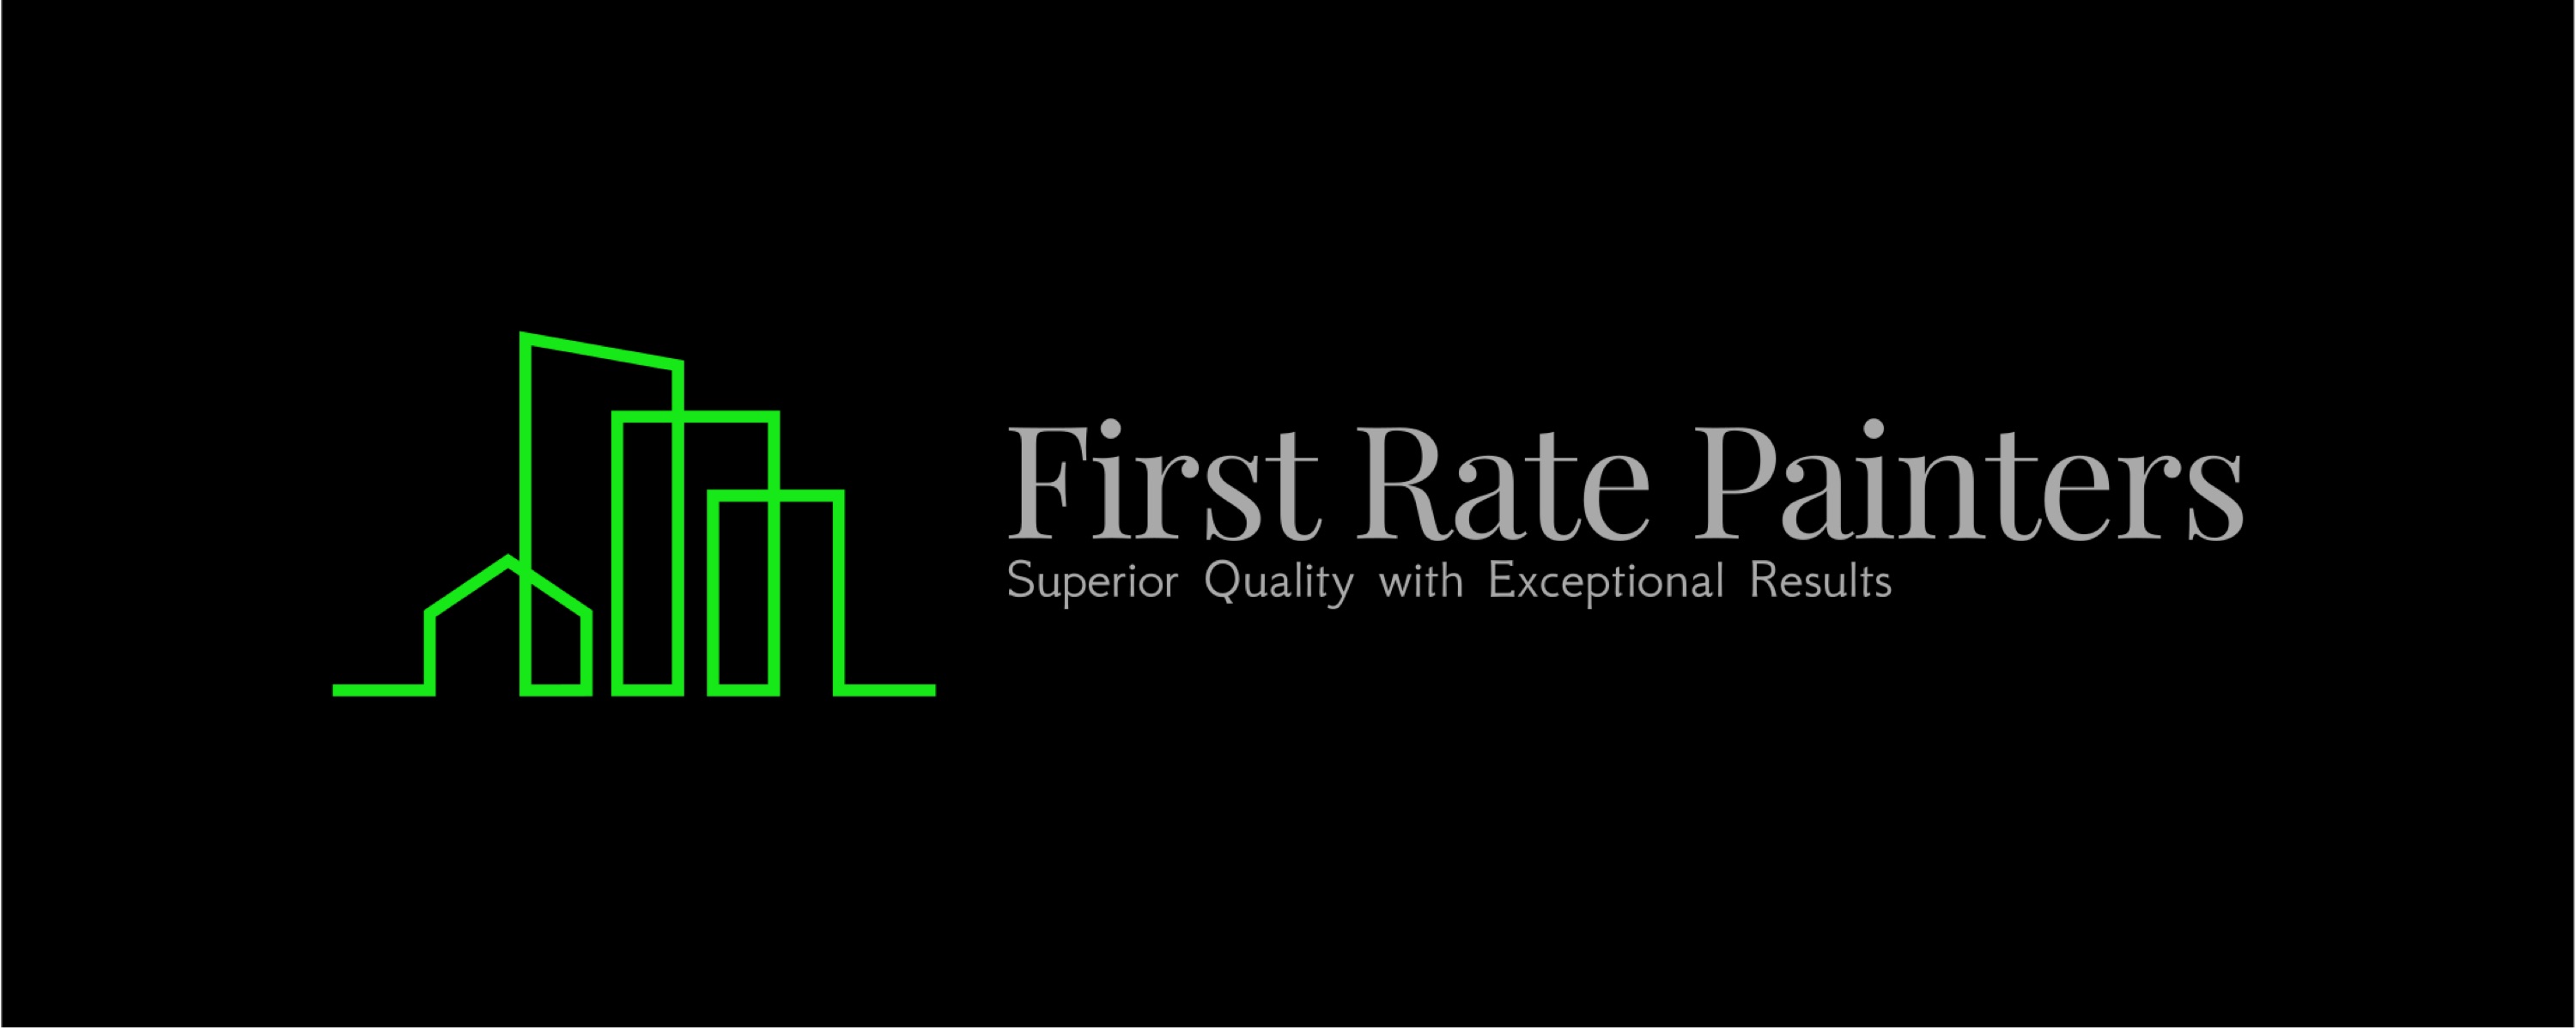 First Rate Painters Logo